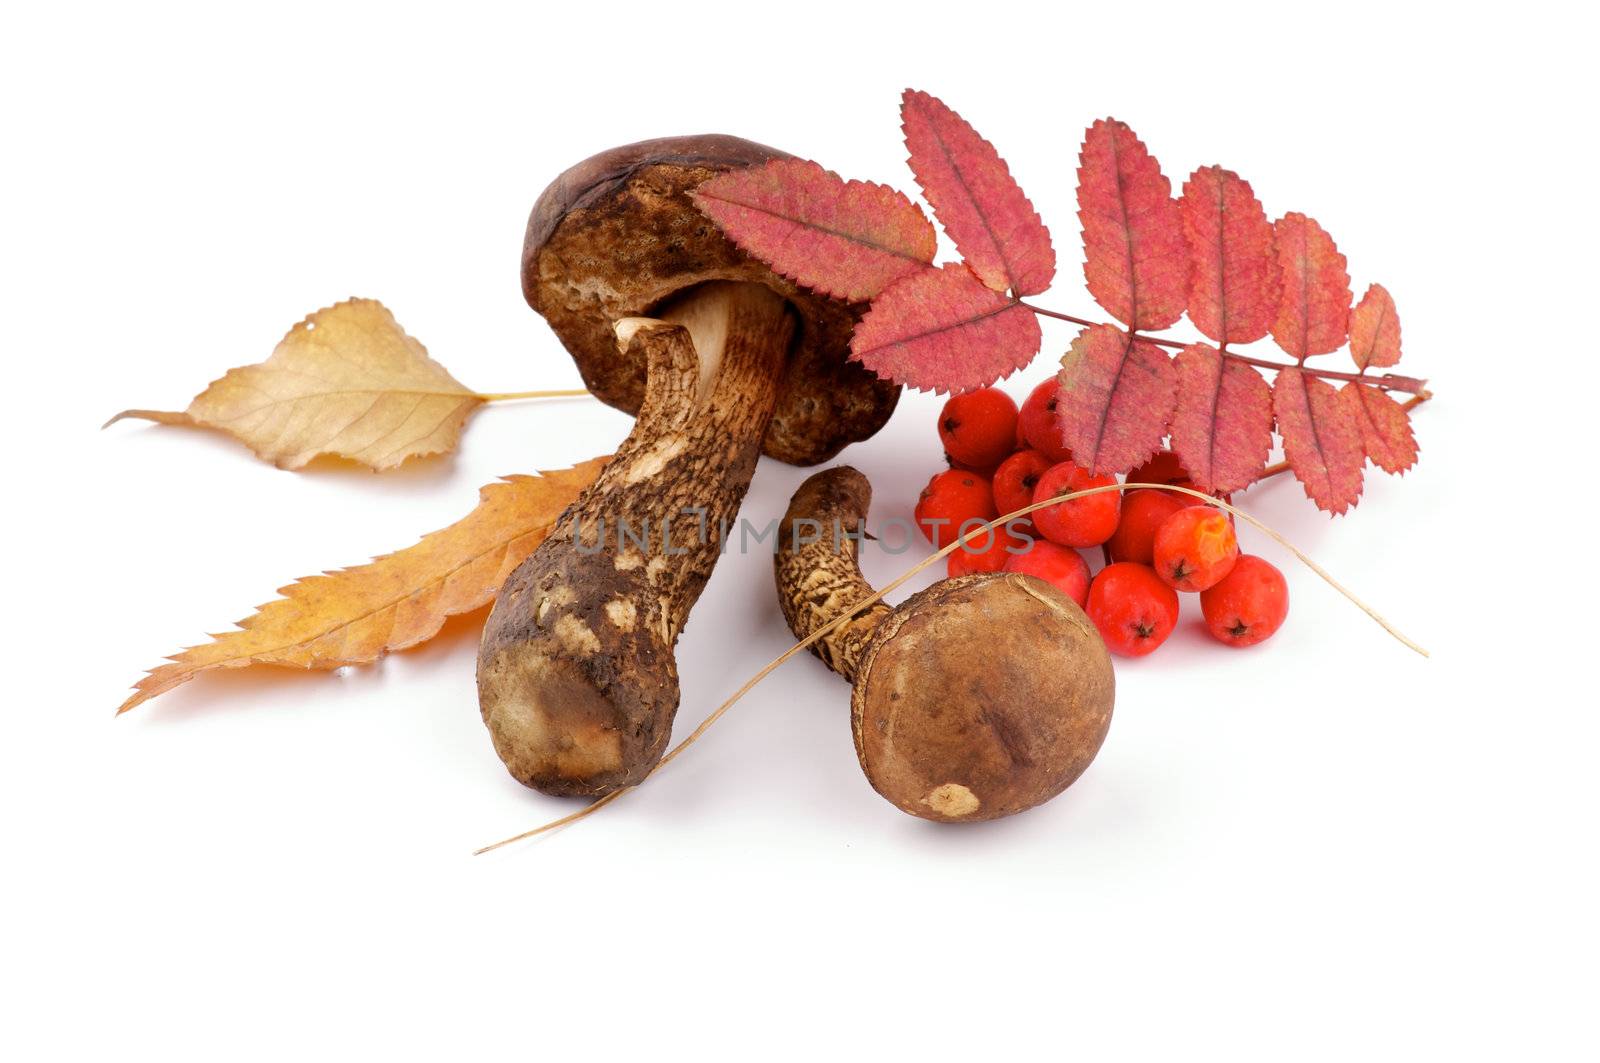 Brown Cap Boletus, Leafs and Cranberry by zhekos